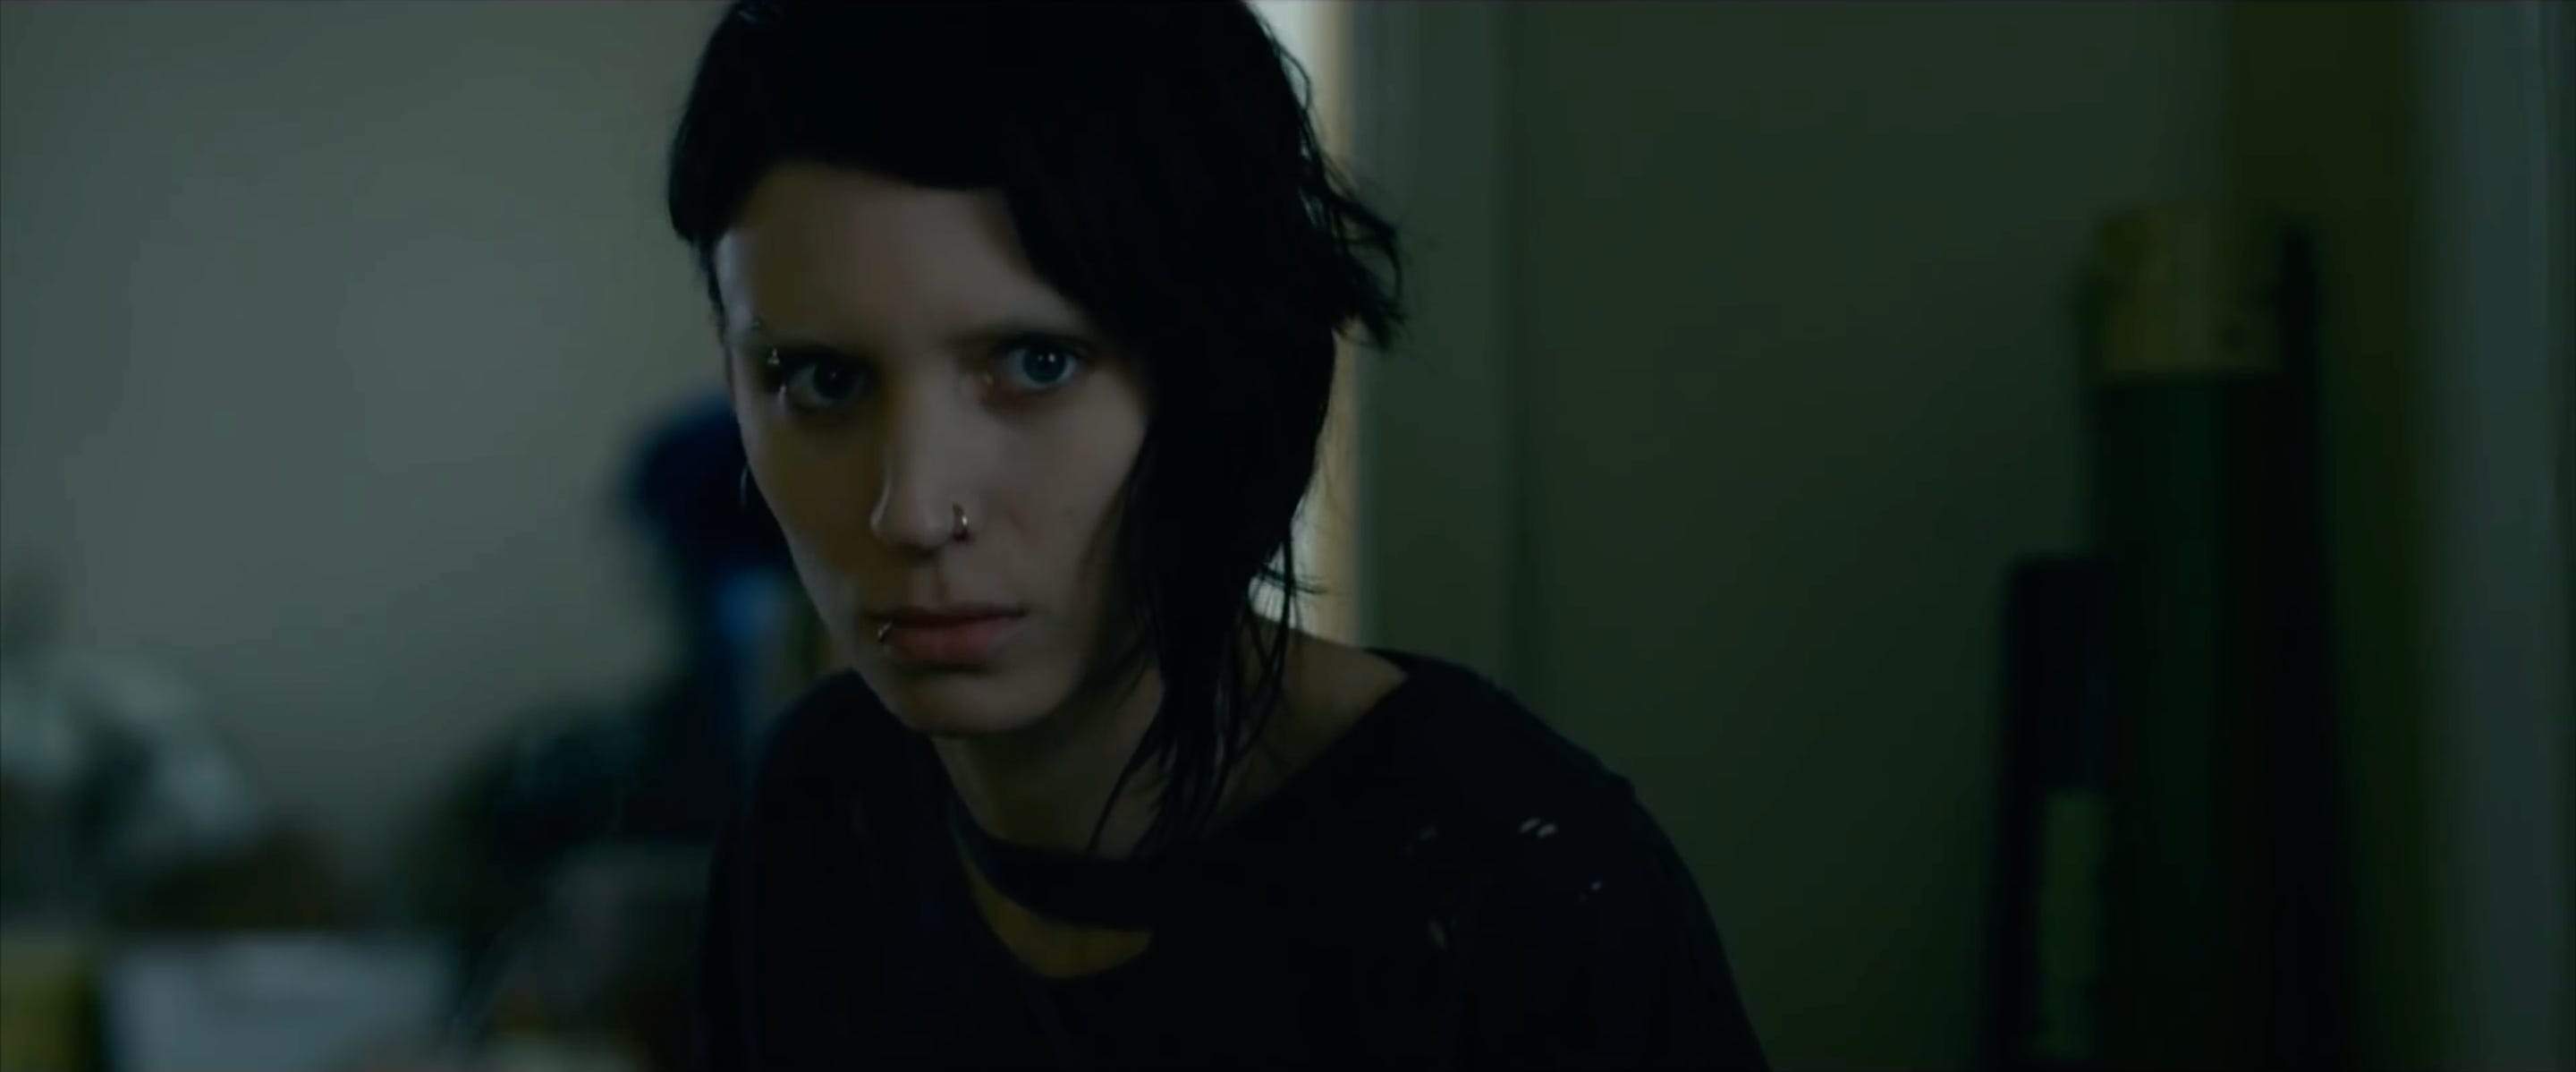 Mysterious Trailer for David Fincher's 'The Girl With the Dragon